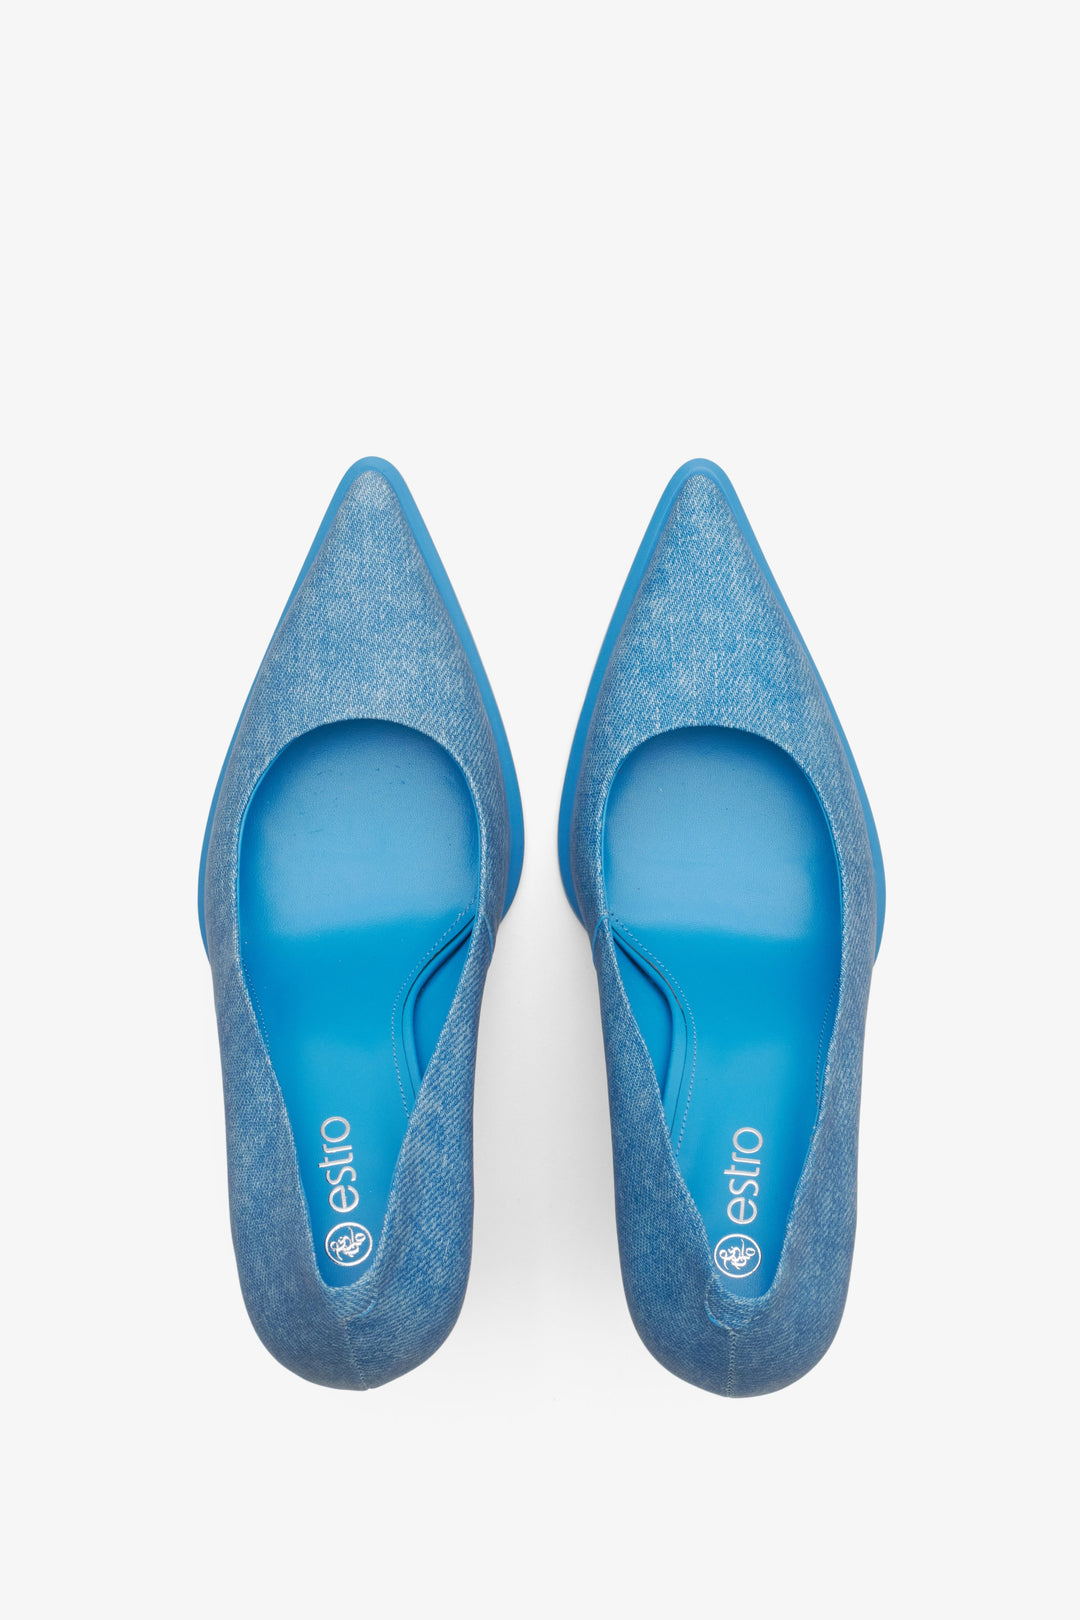 Women's blue denim pumps by Estro - close-up on the heel and side line of the shoes.